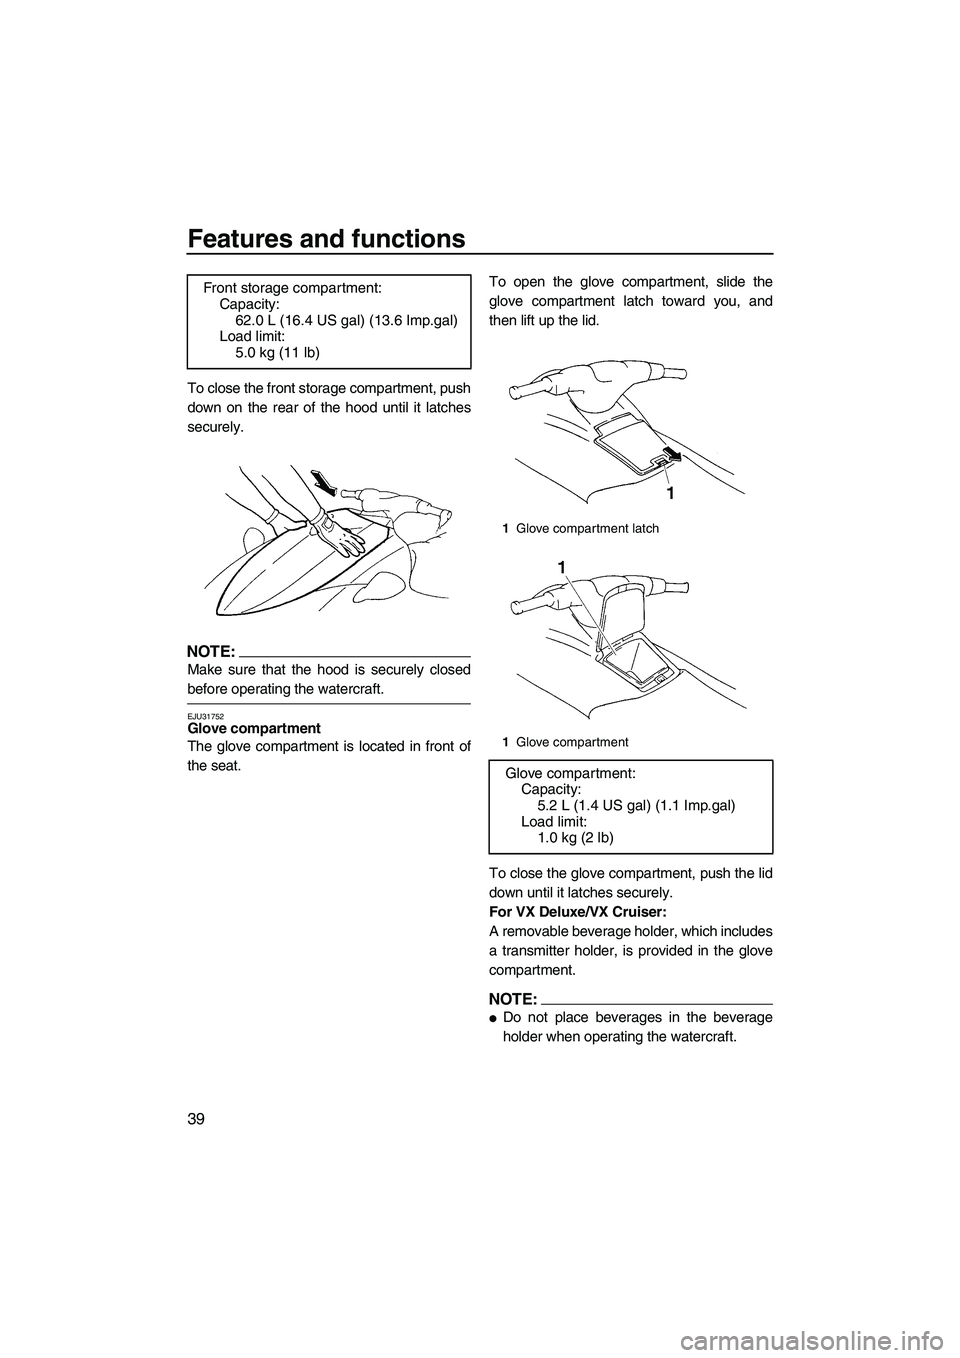 YAMAHA VX SPORT 2007  Owners Manual Features and functions
39
To close the front storage compartment, push
down on the rear of the hood until it latches
securely.
NOTE:
Make sure that the hood is securely closed
before operating the wat